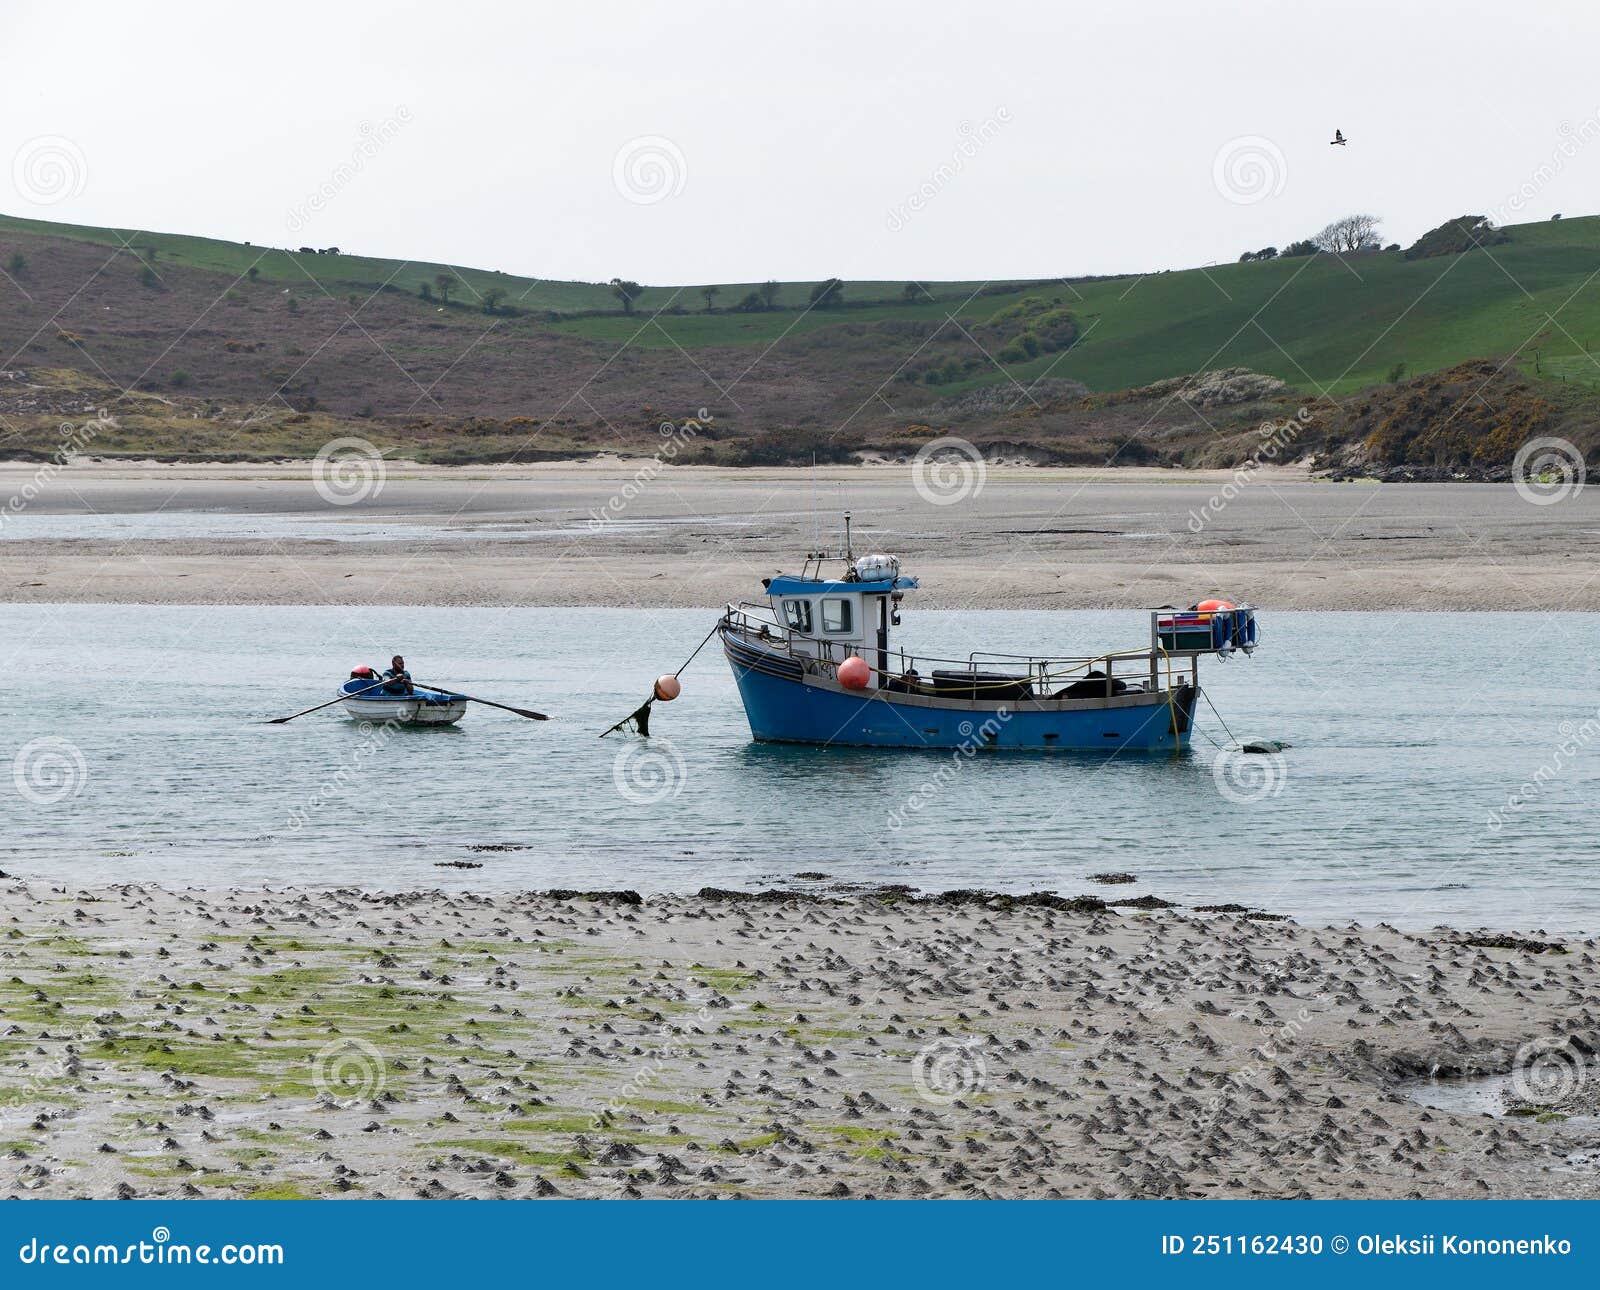 A Small Fishing Boat Moored in Shallow Water. One Man in a Rowing